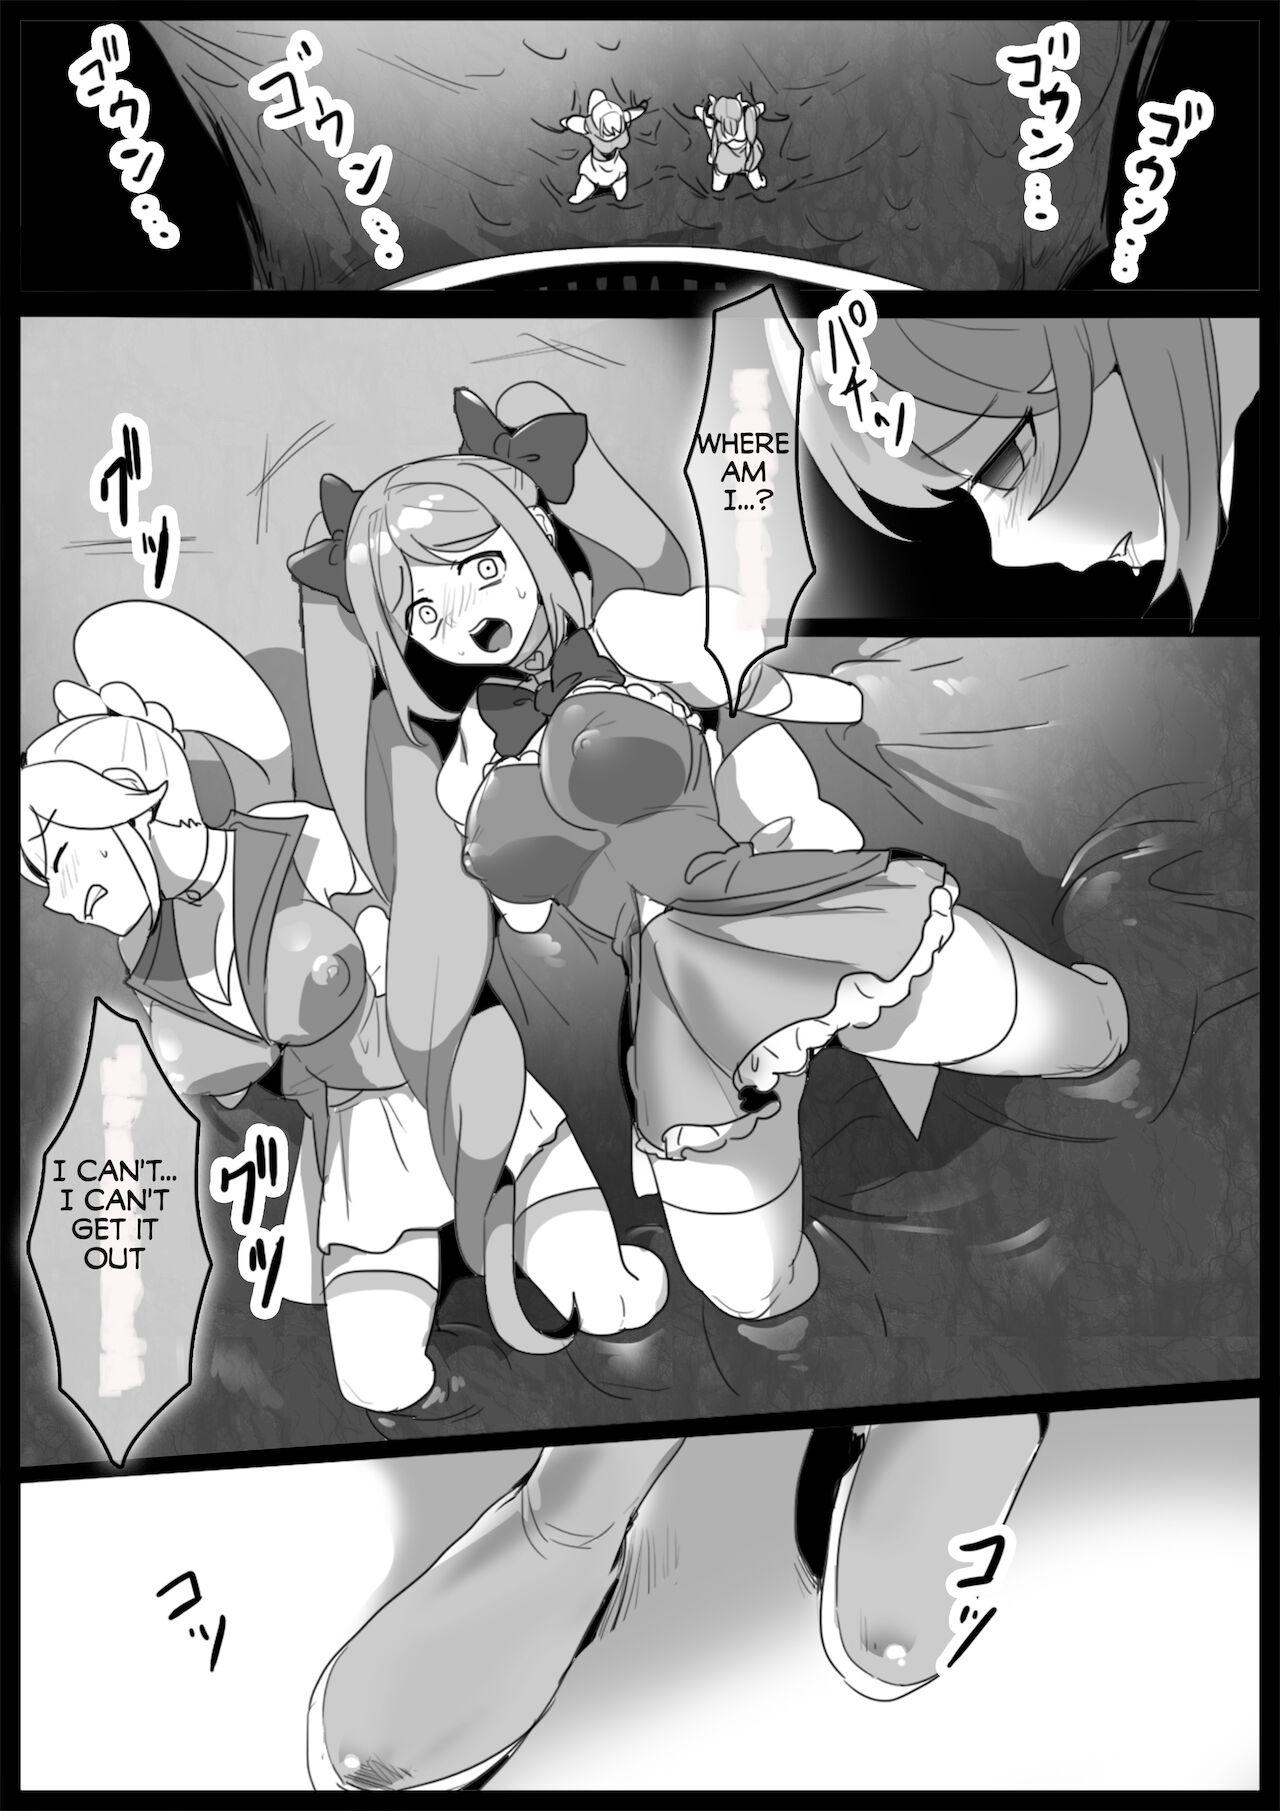 Swinger Magical Girl Seedbedded and Corrupted in the Final Episode Sexy - Page 2